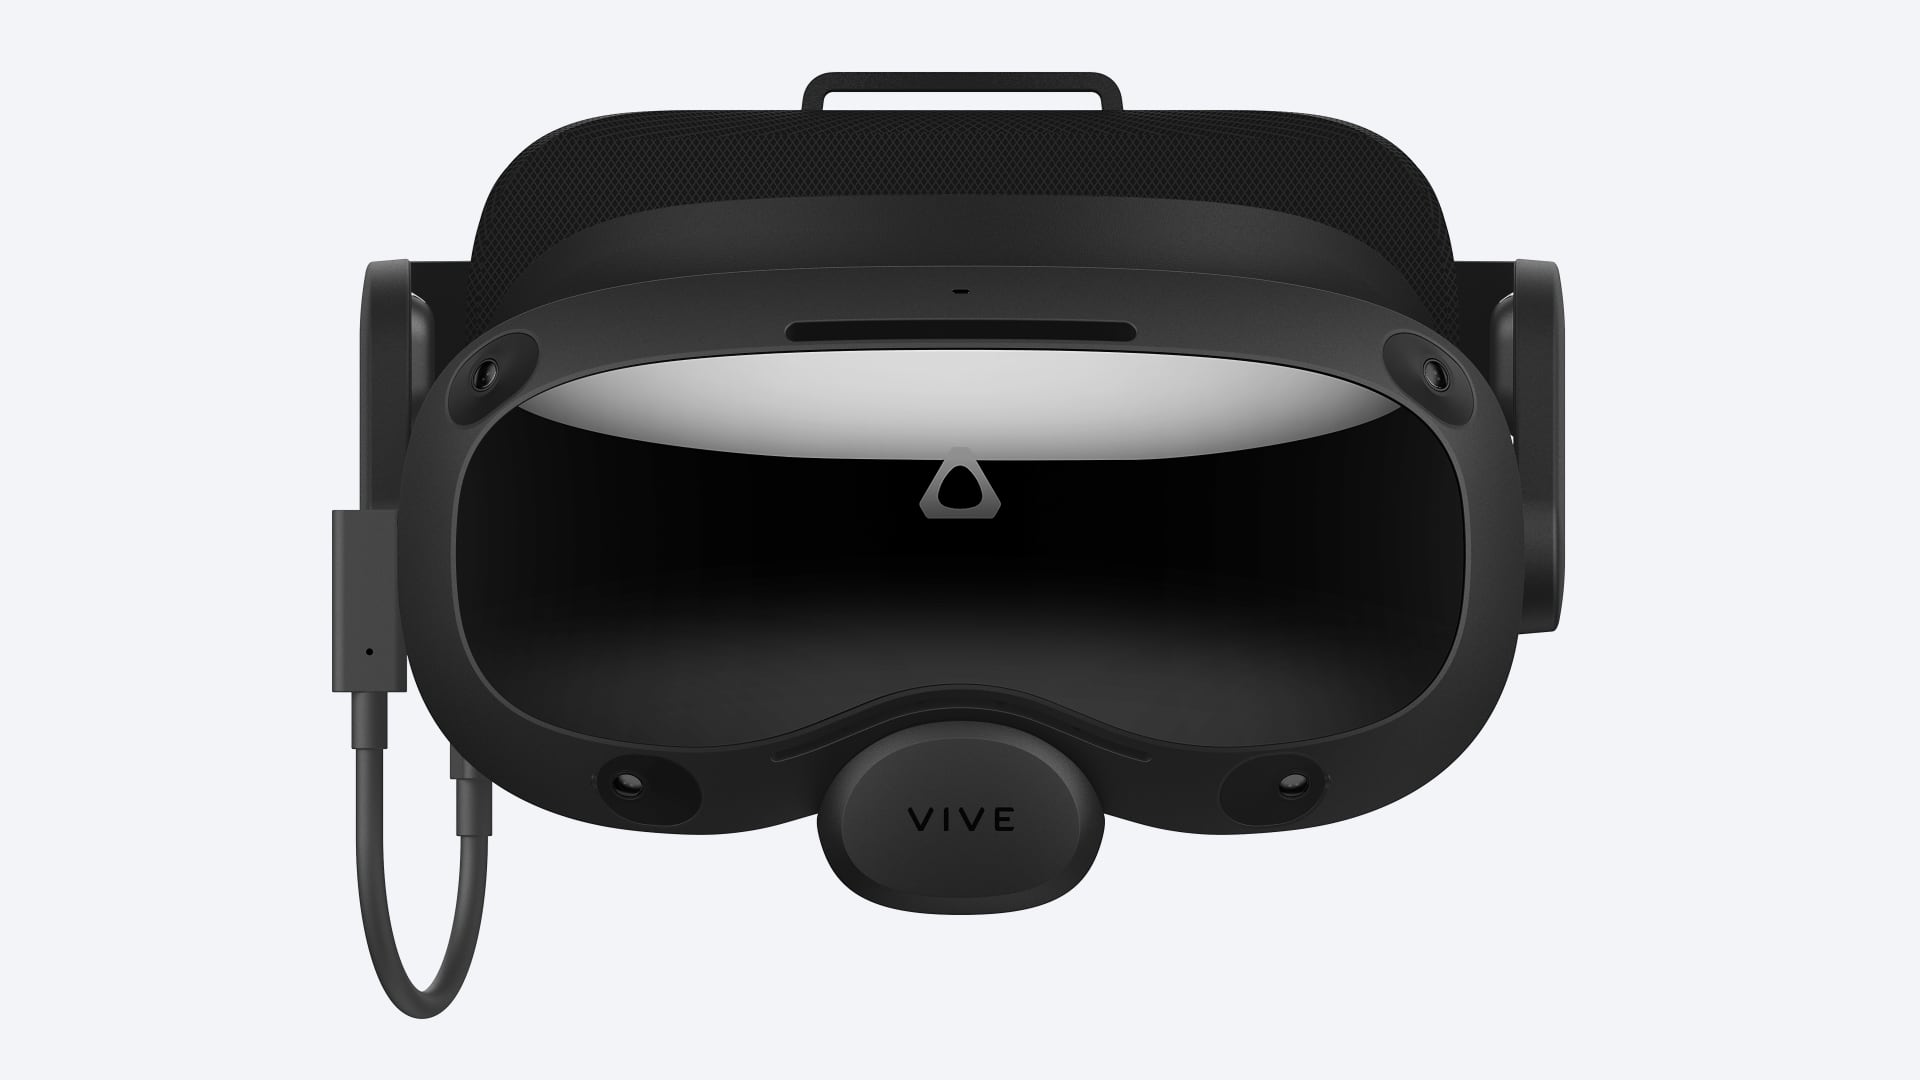 The VIVE Focus 3 headset fully laden with the new modules